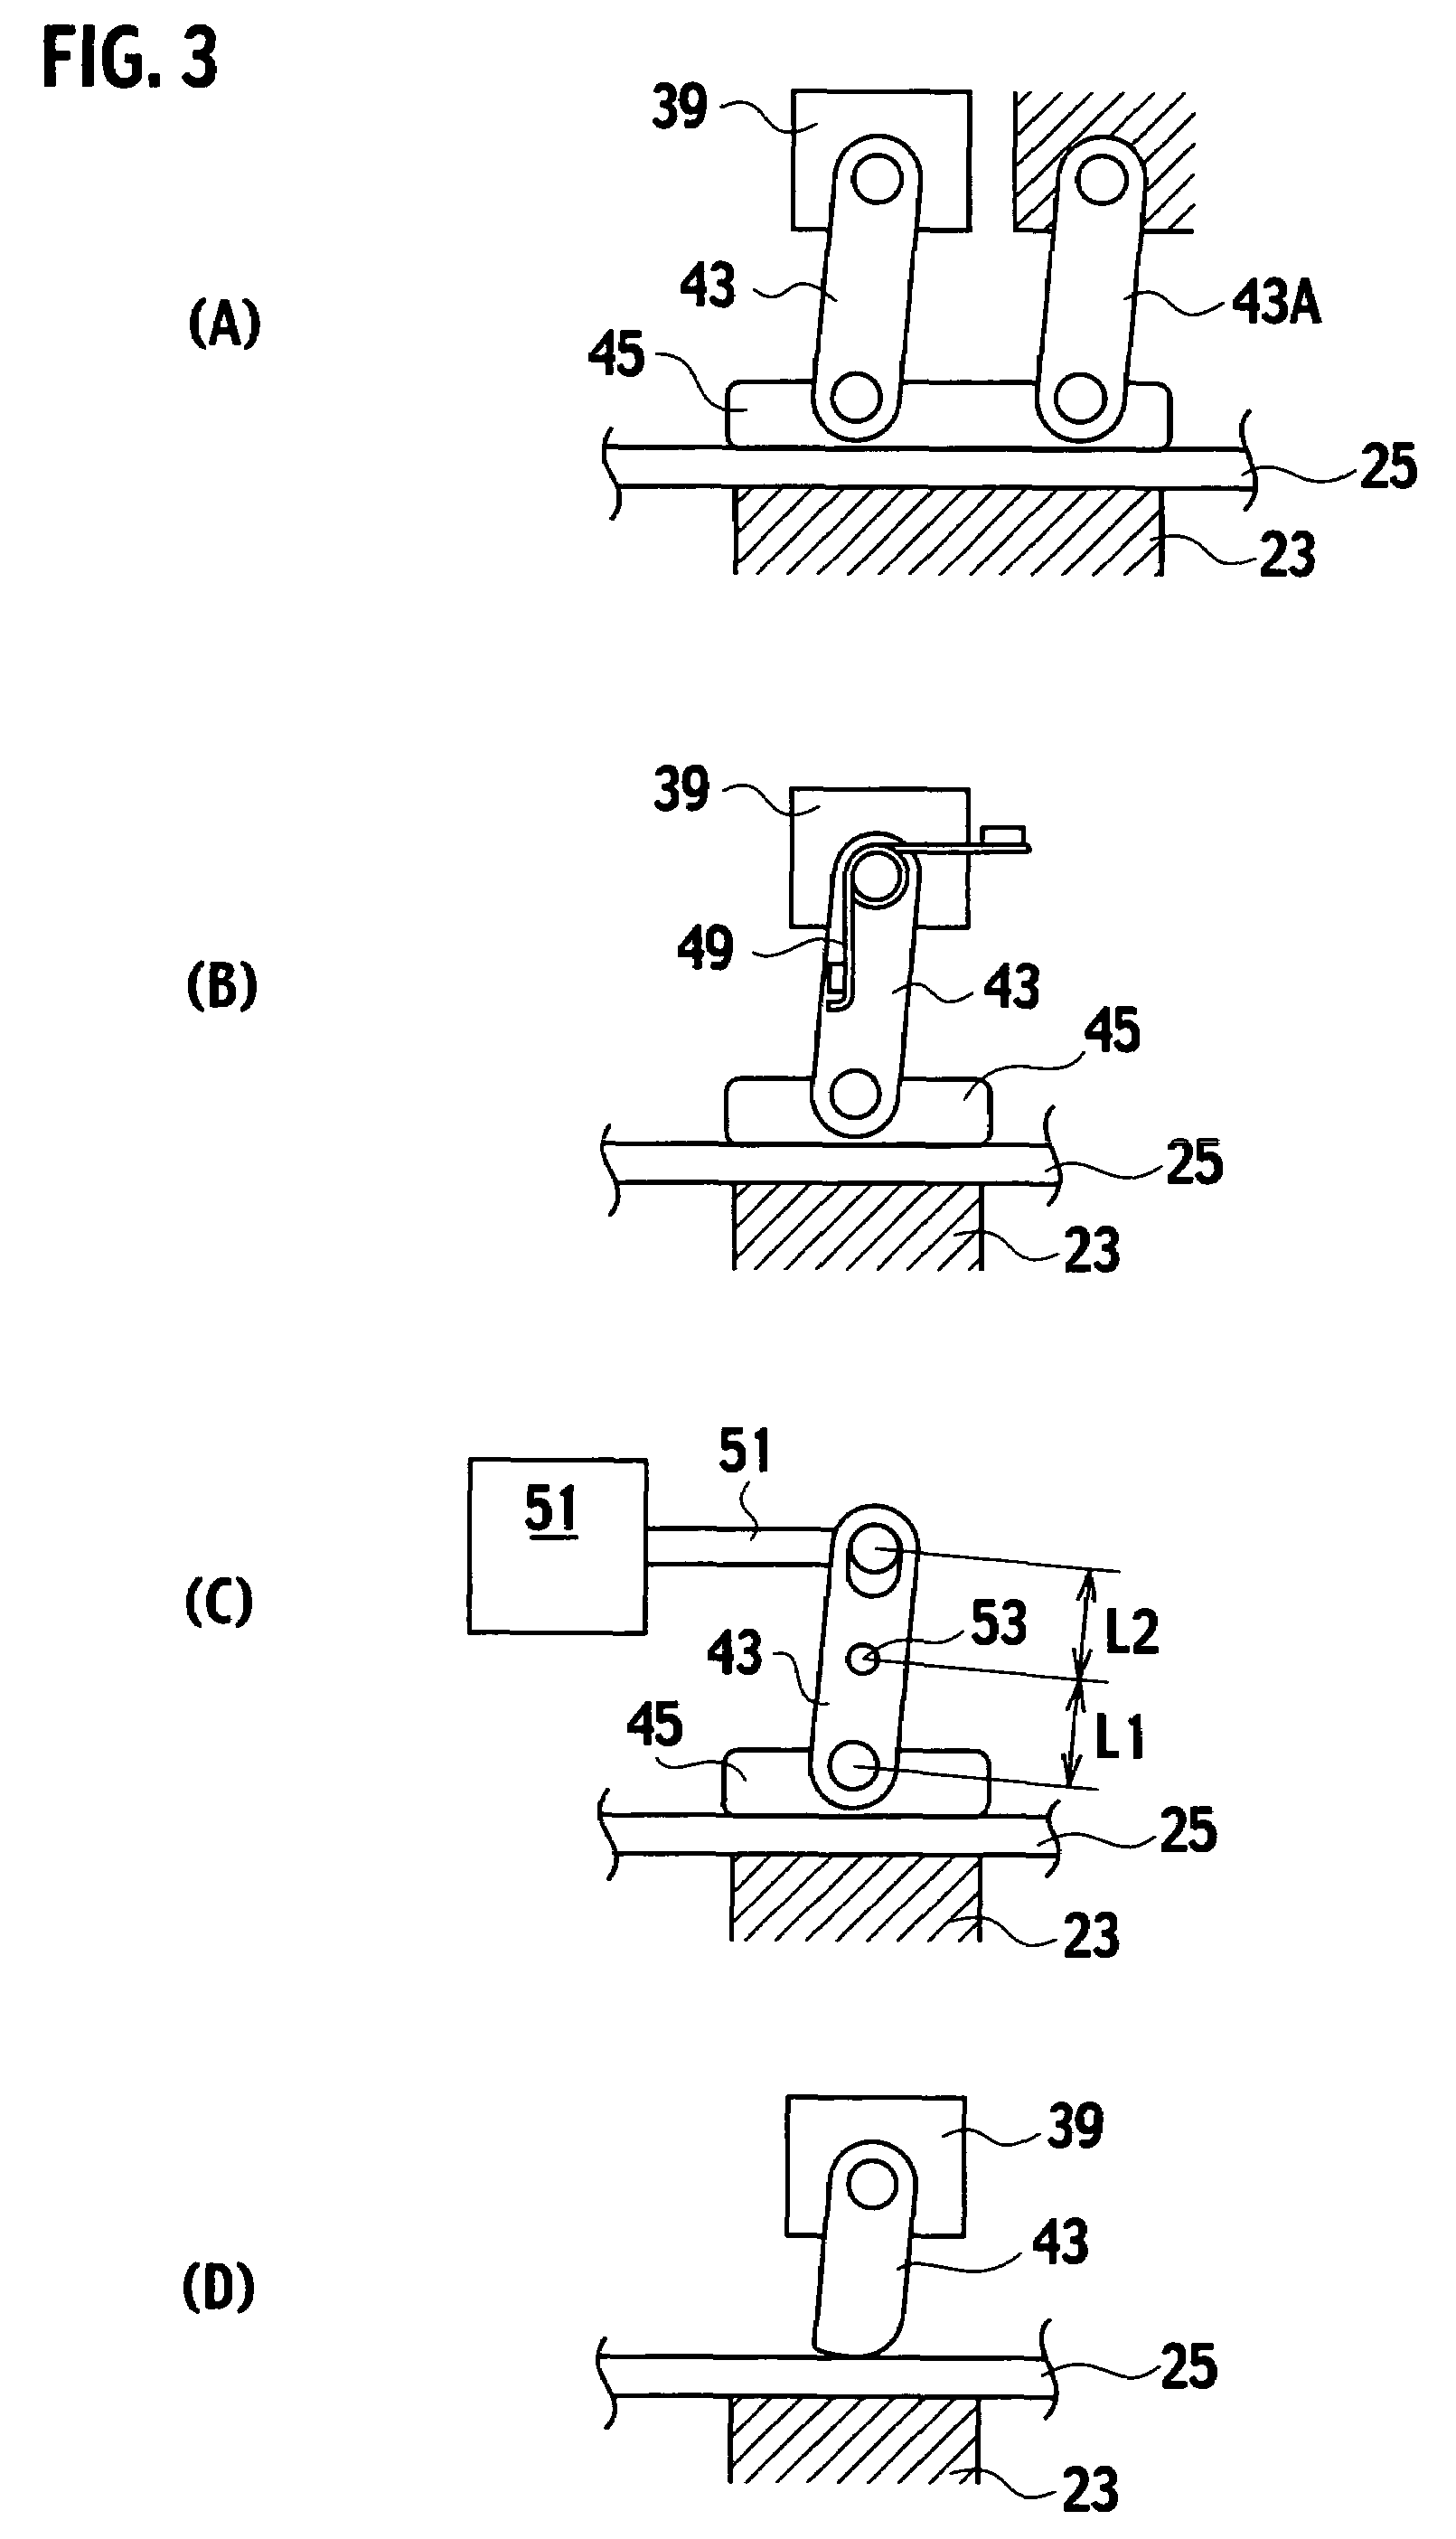 Variable valve operating device for engine